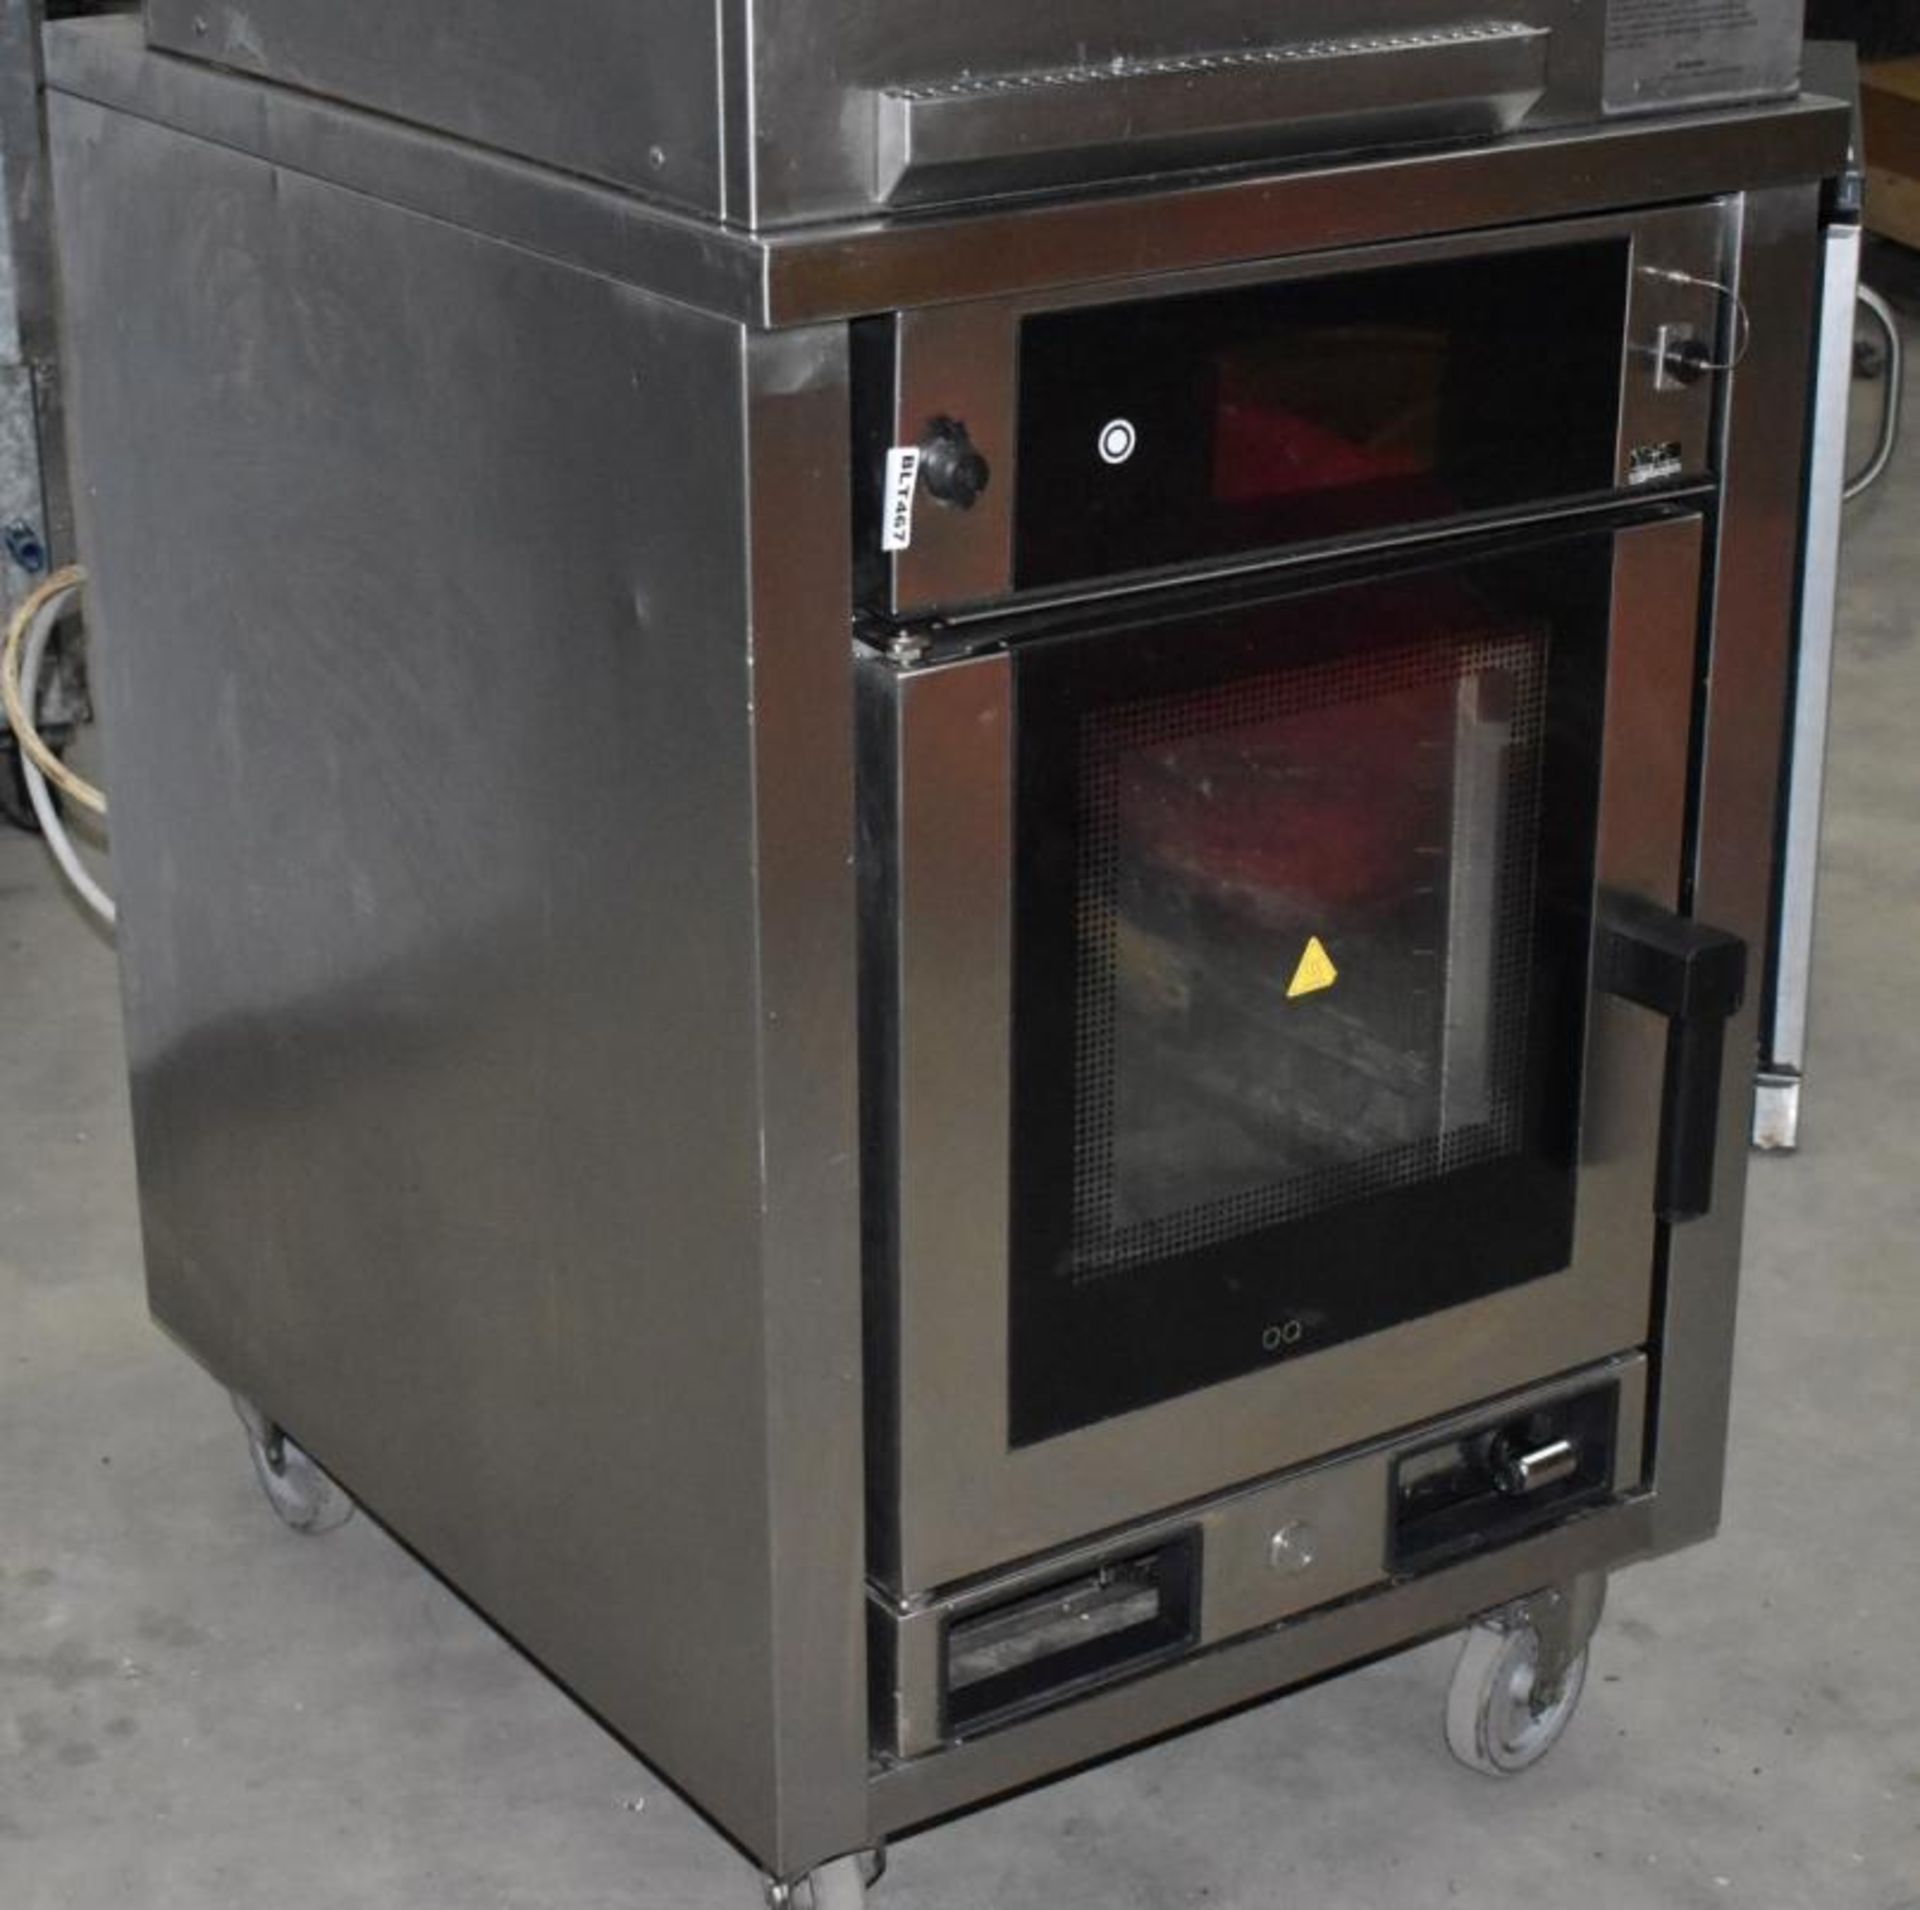 1 x Moduline Cook and Hold Convection Oven and Pressure Steamer Cooker - Features USB Connection, To - Image 12 of 16